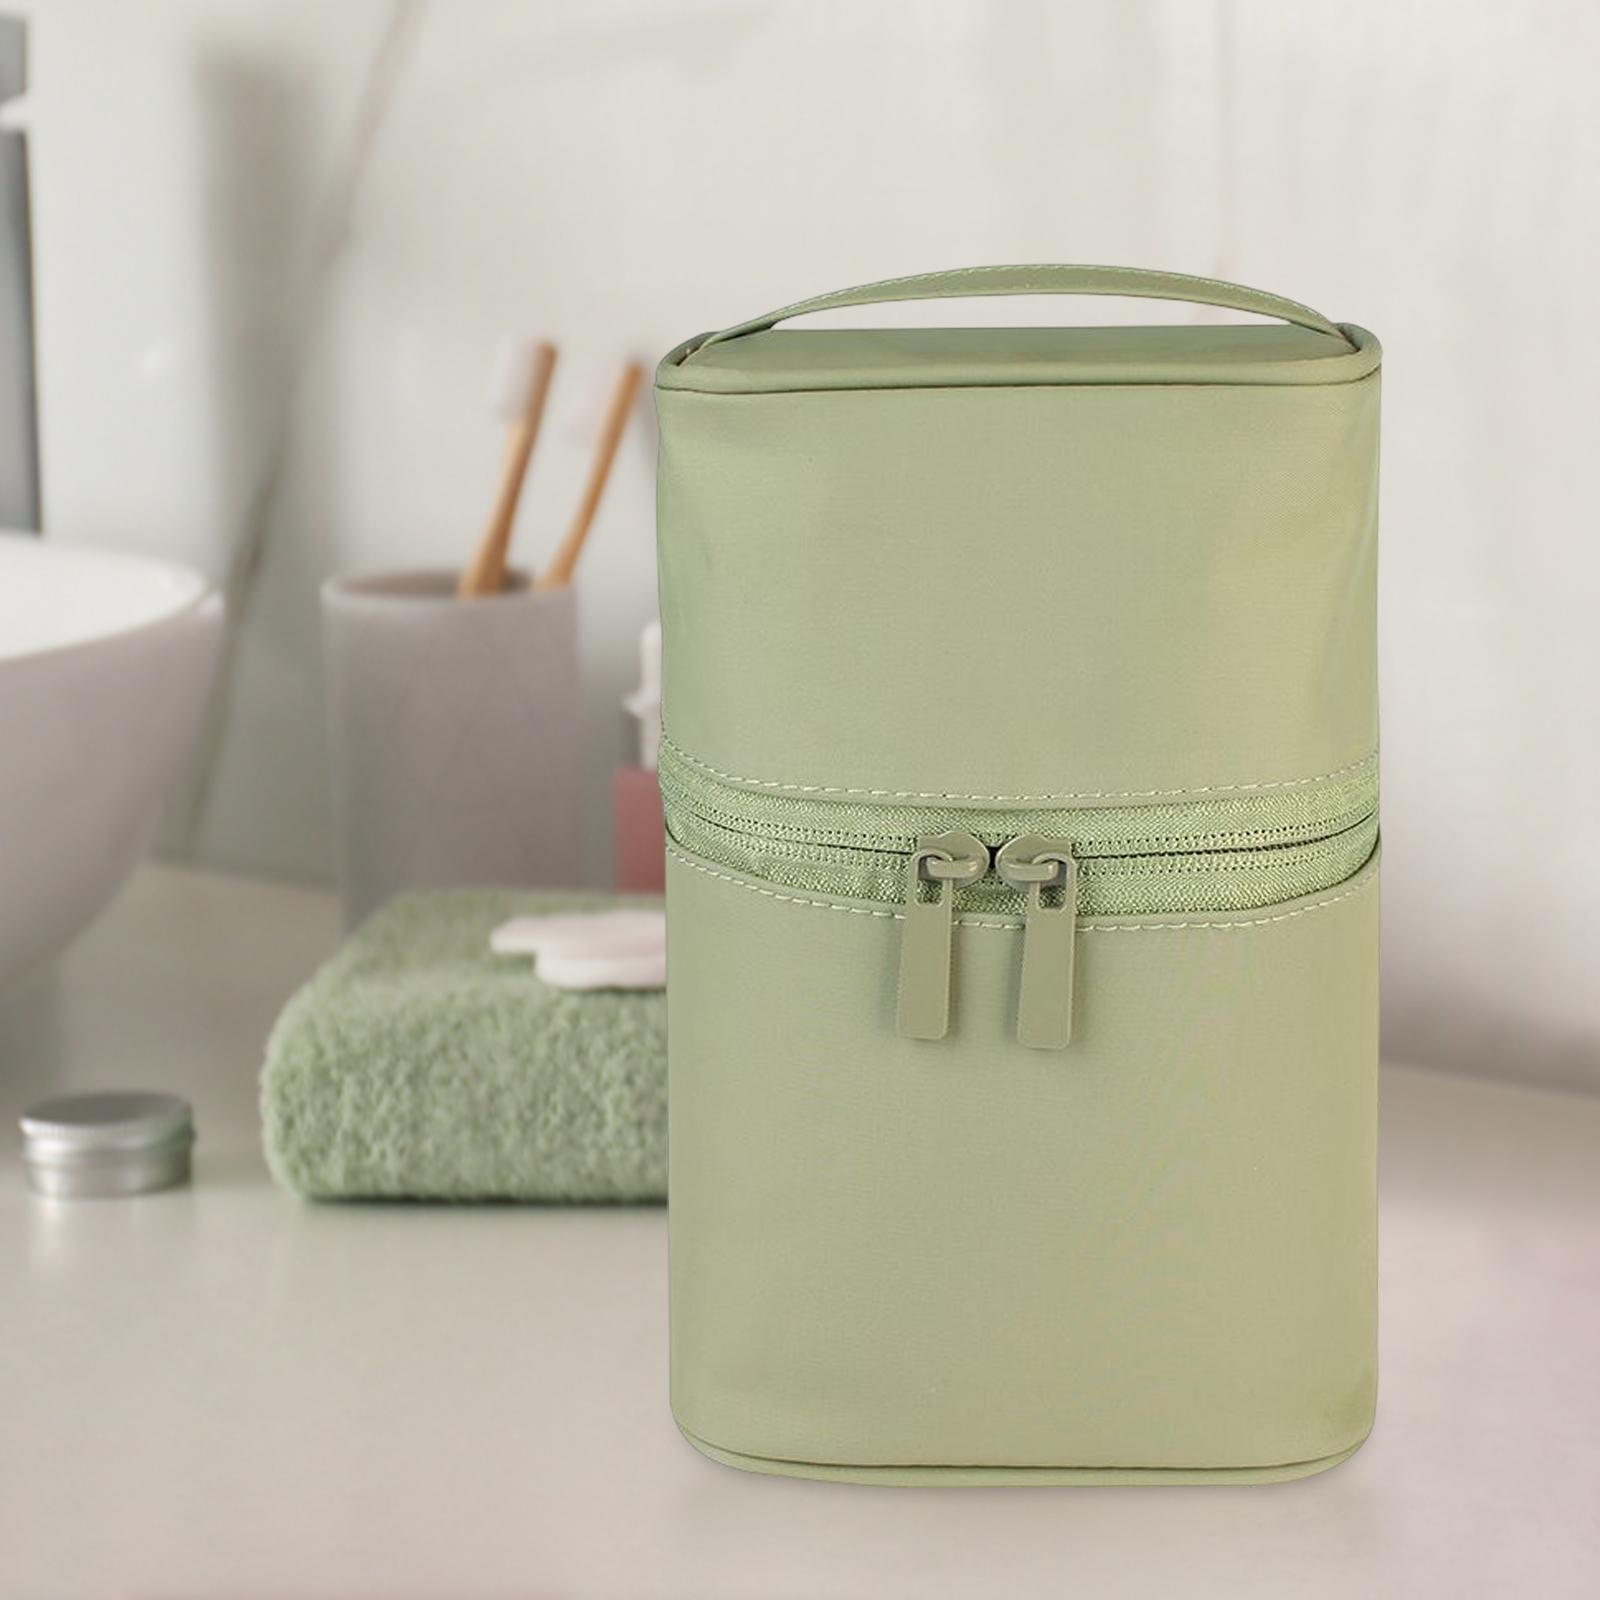 Travel Makeup Bag, Barrel Shaped Toiletry Bucket Toiletry Storage Pouch for Camping